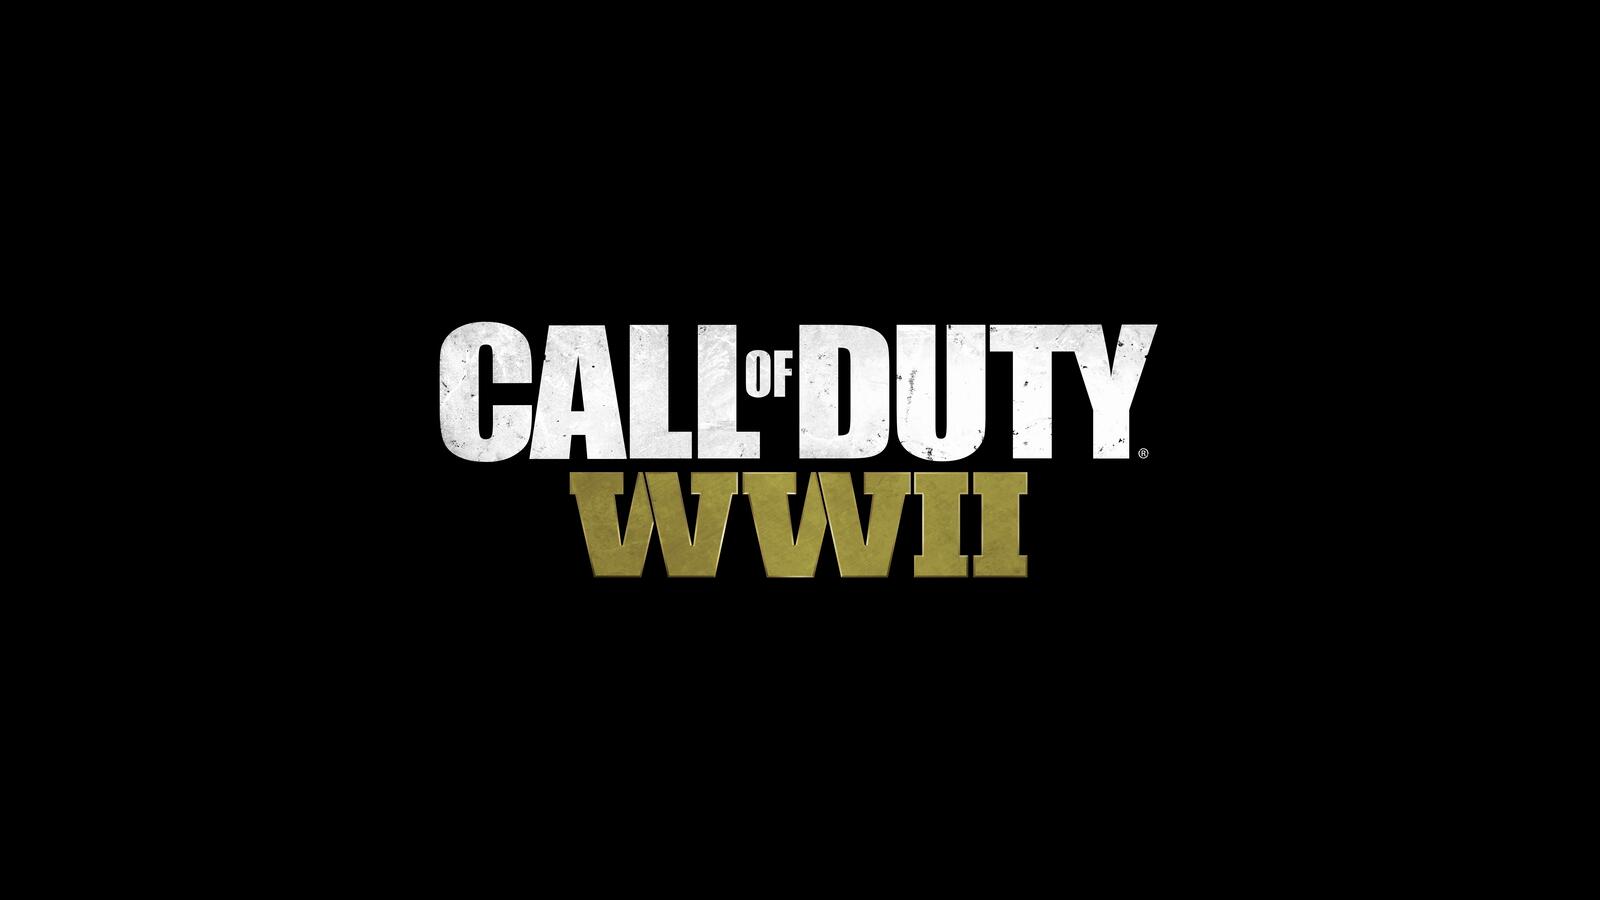 Wallpapers Call Of Duty WWII splash screen black background on the desktop